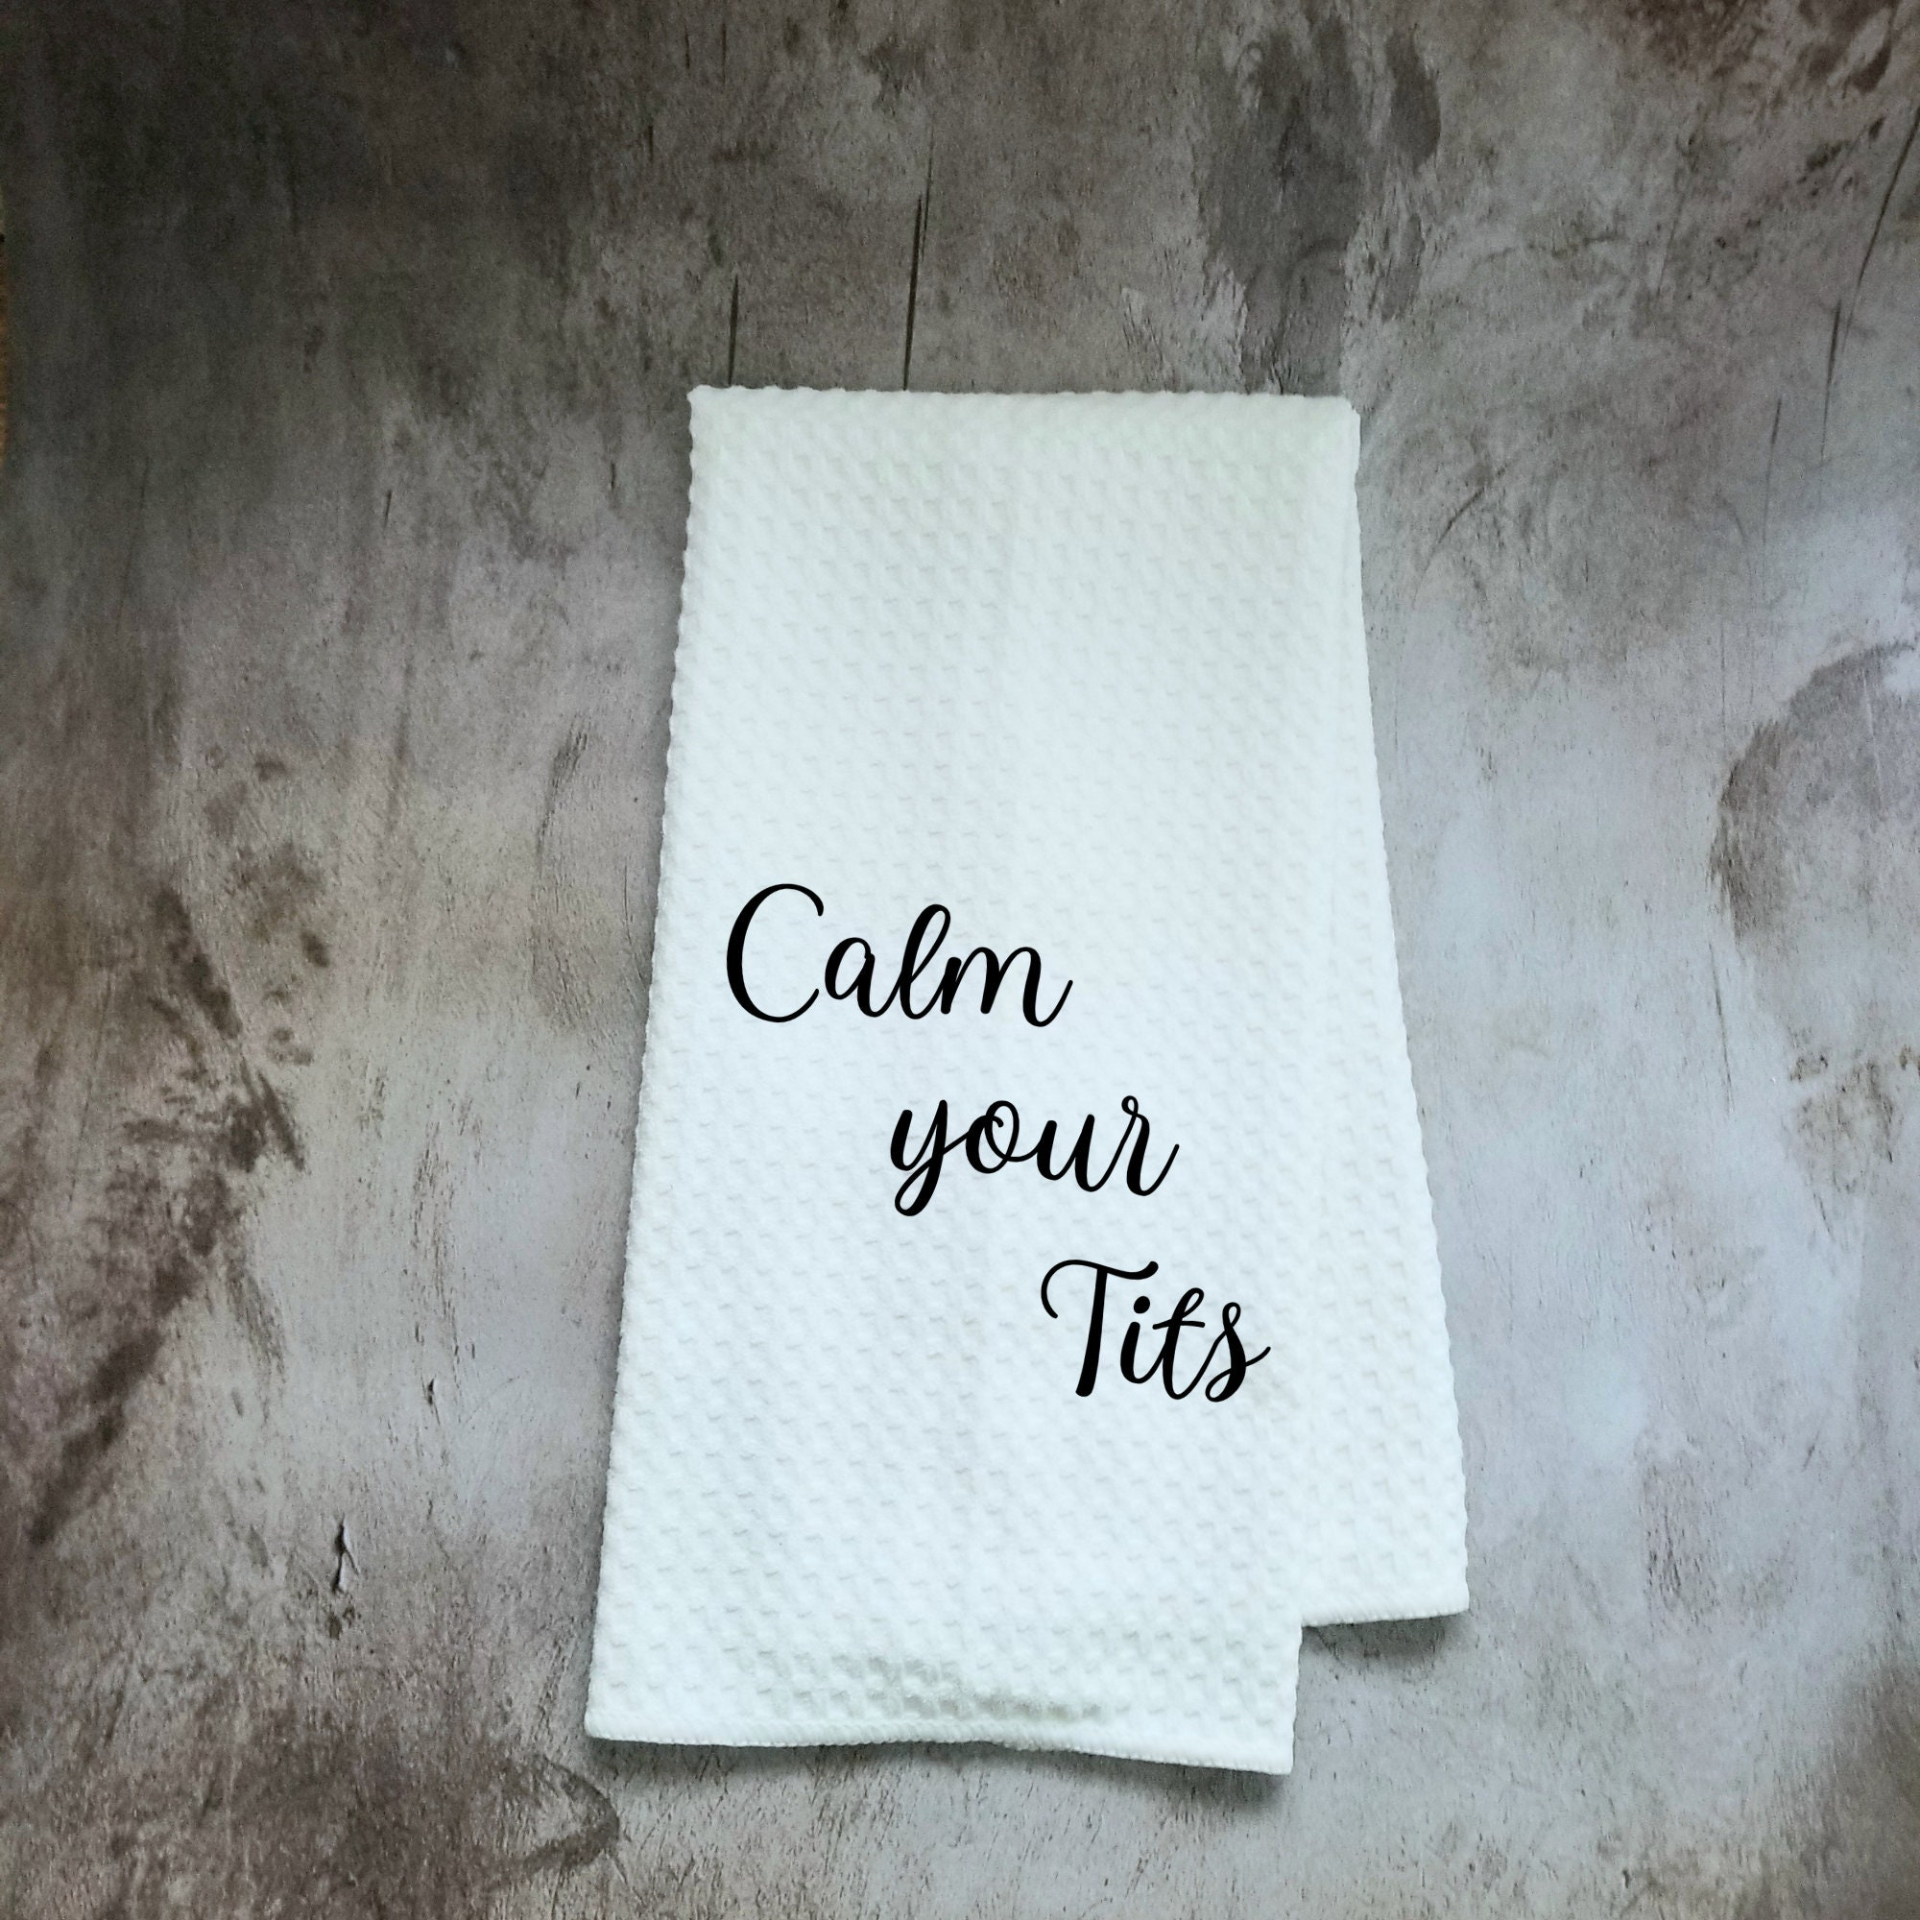 Calm Your Tits Dish Towel | Funny Kitchen Towel with Sarcastic Quote | Decorative Hand Towel for Housewarming Gift or Chef Gift, Goodies N Stuff